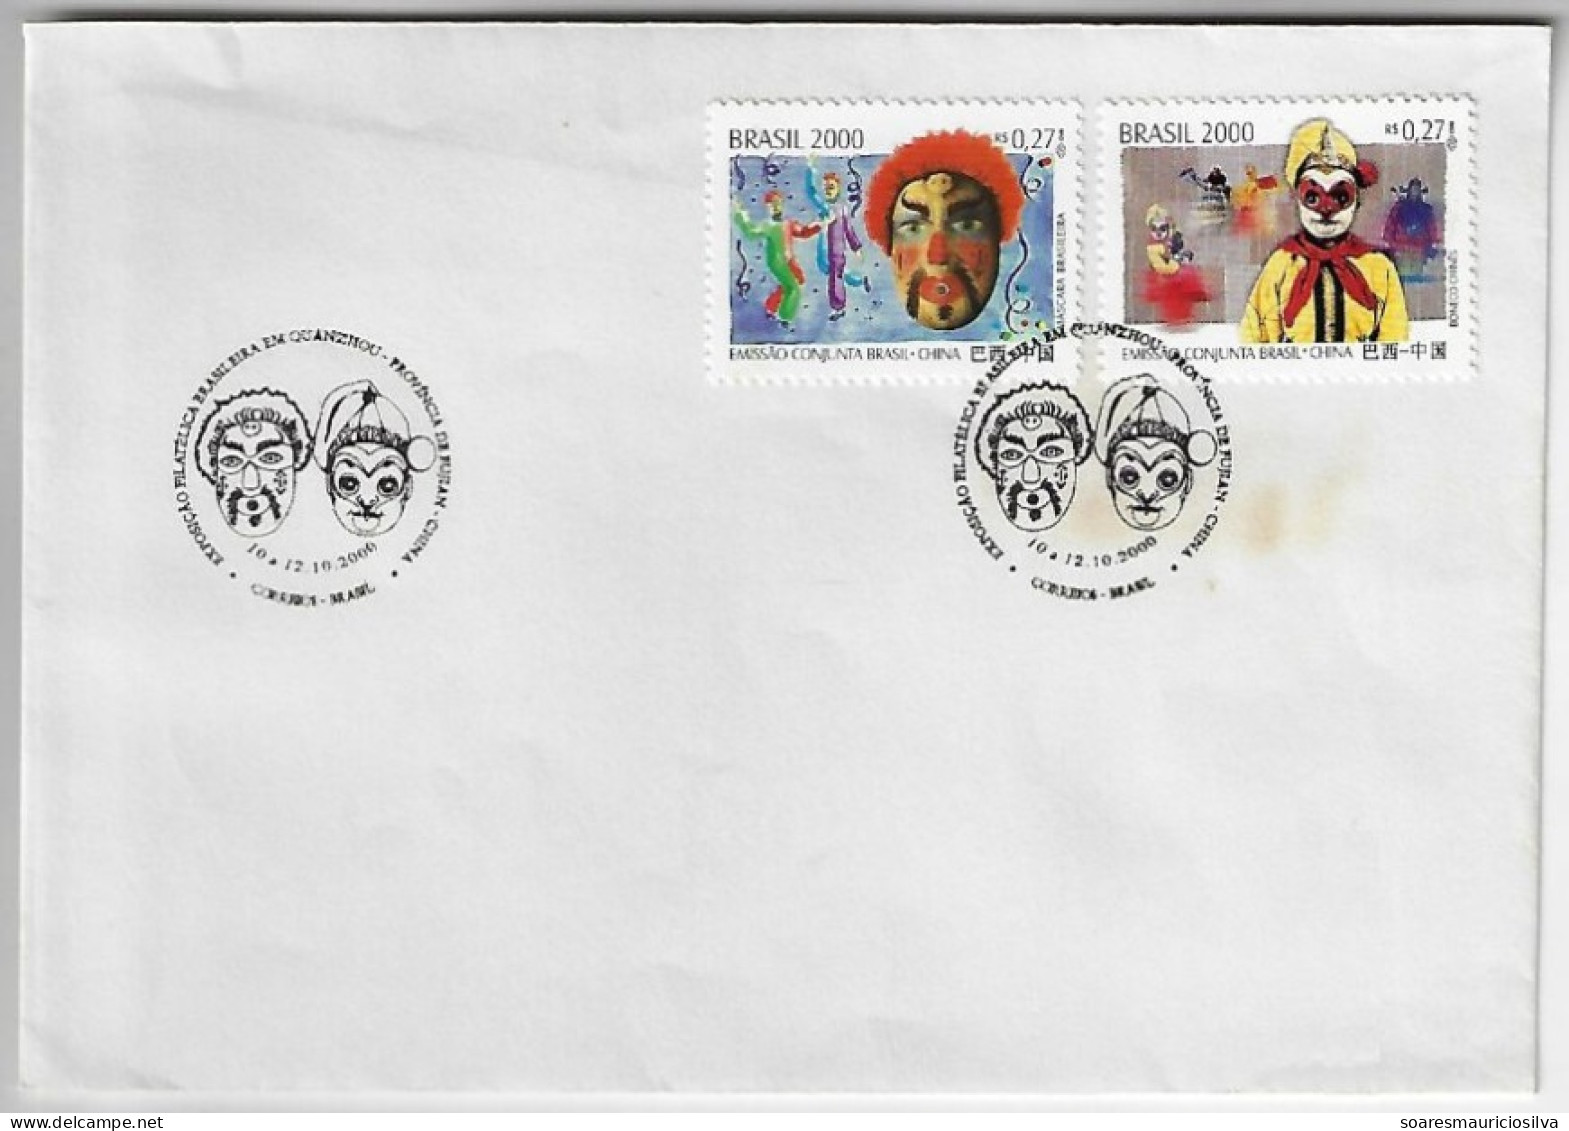 2000 2 Cover Stamp Joint Issue Brazil China 25 Years Diplomatic Relations Between Countries Brazilian Mask Chinese Doll - Storia Postale